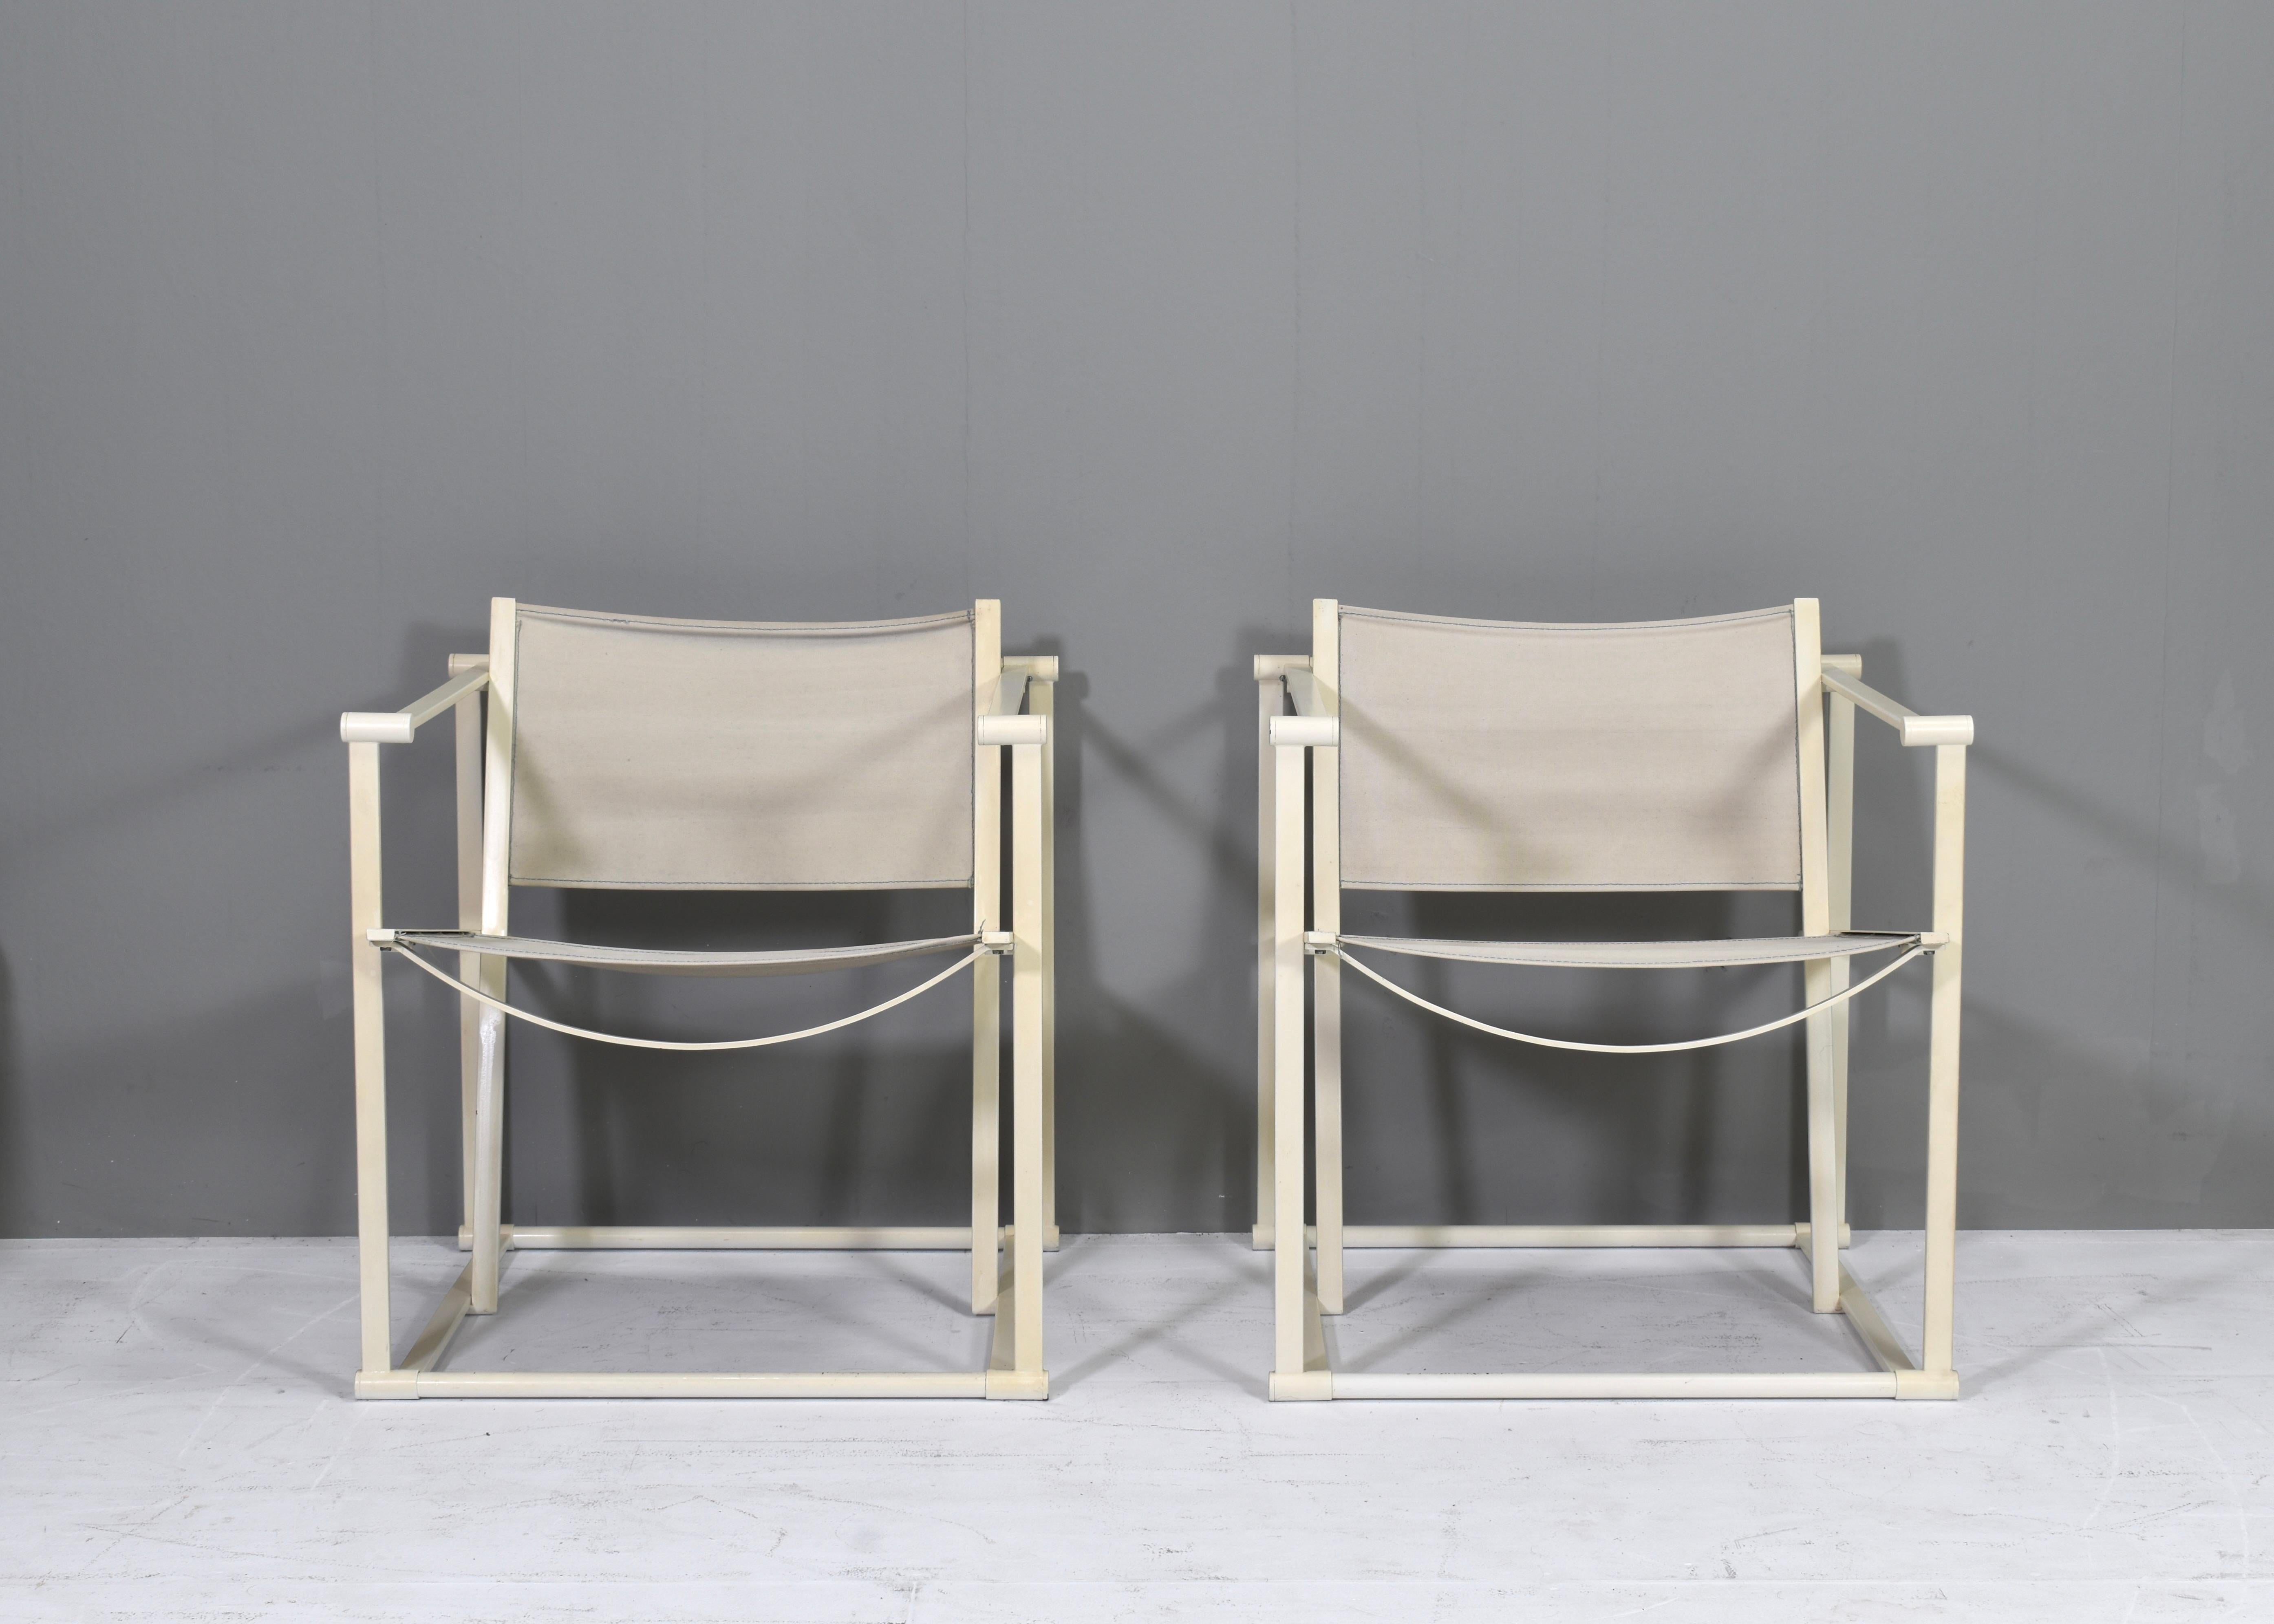 Iconic and minimalistic cube lounge chairs by Radboud van Beekum for PASTOE - Netherlands, 1981. The chairs are made of creme lacquered metal with original canvas upholstery. Although not necessary we can on request change the upholstery to for